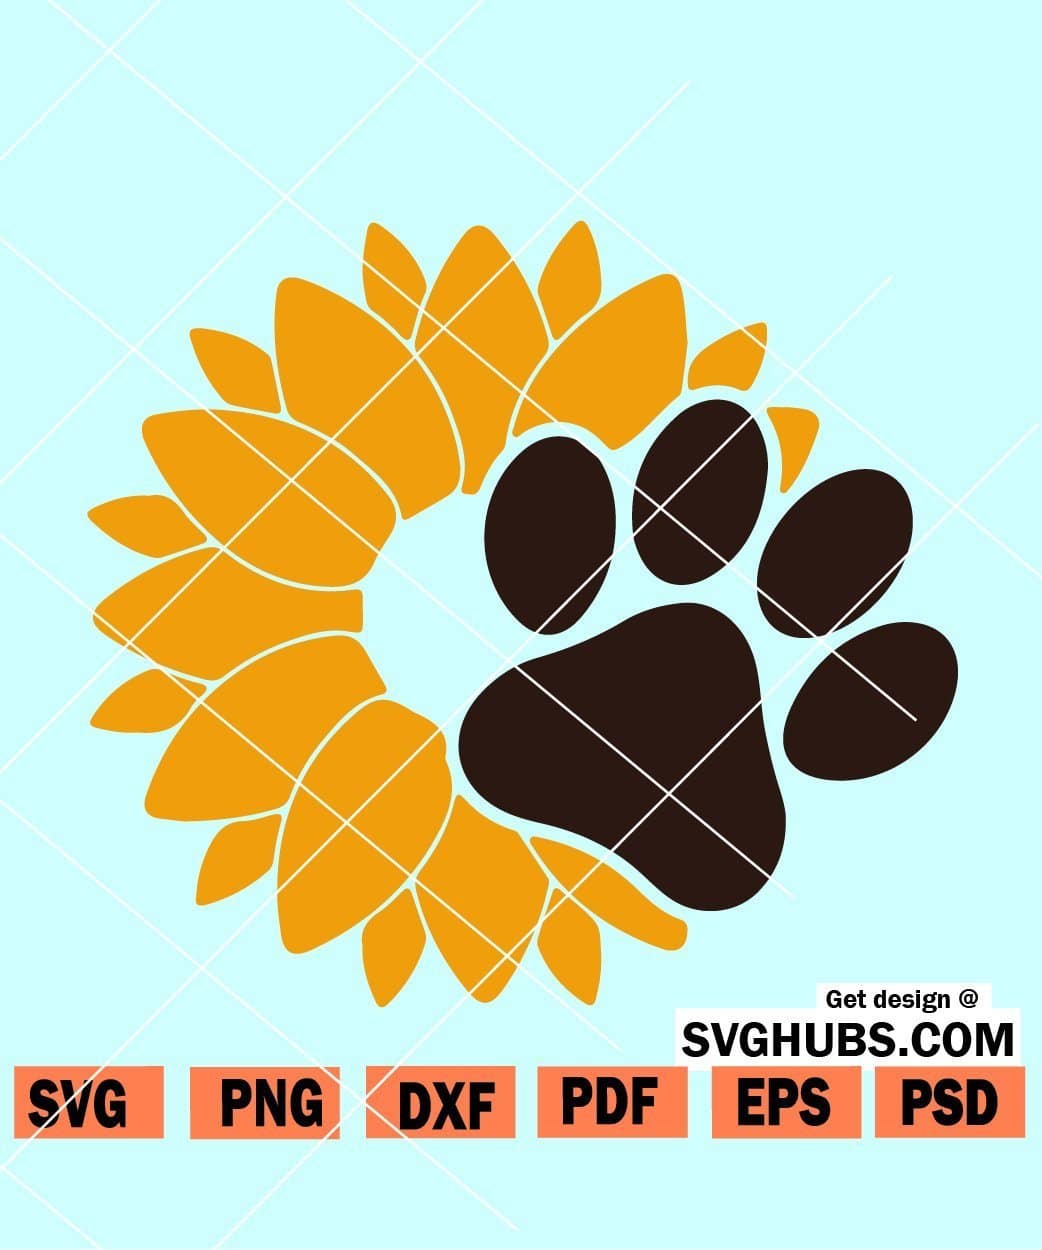 Download Sunflower Paw Print Svg Sunflower Paw Svg Sunflower With Dog Paw Svg Dog Mom Svg Svg Hubs SVG, PNG, EPS, DXF File